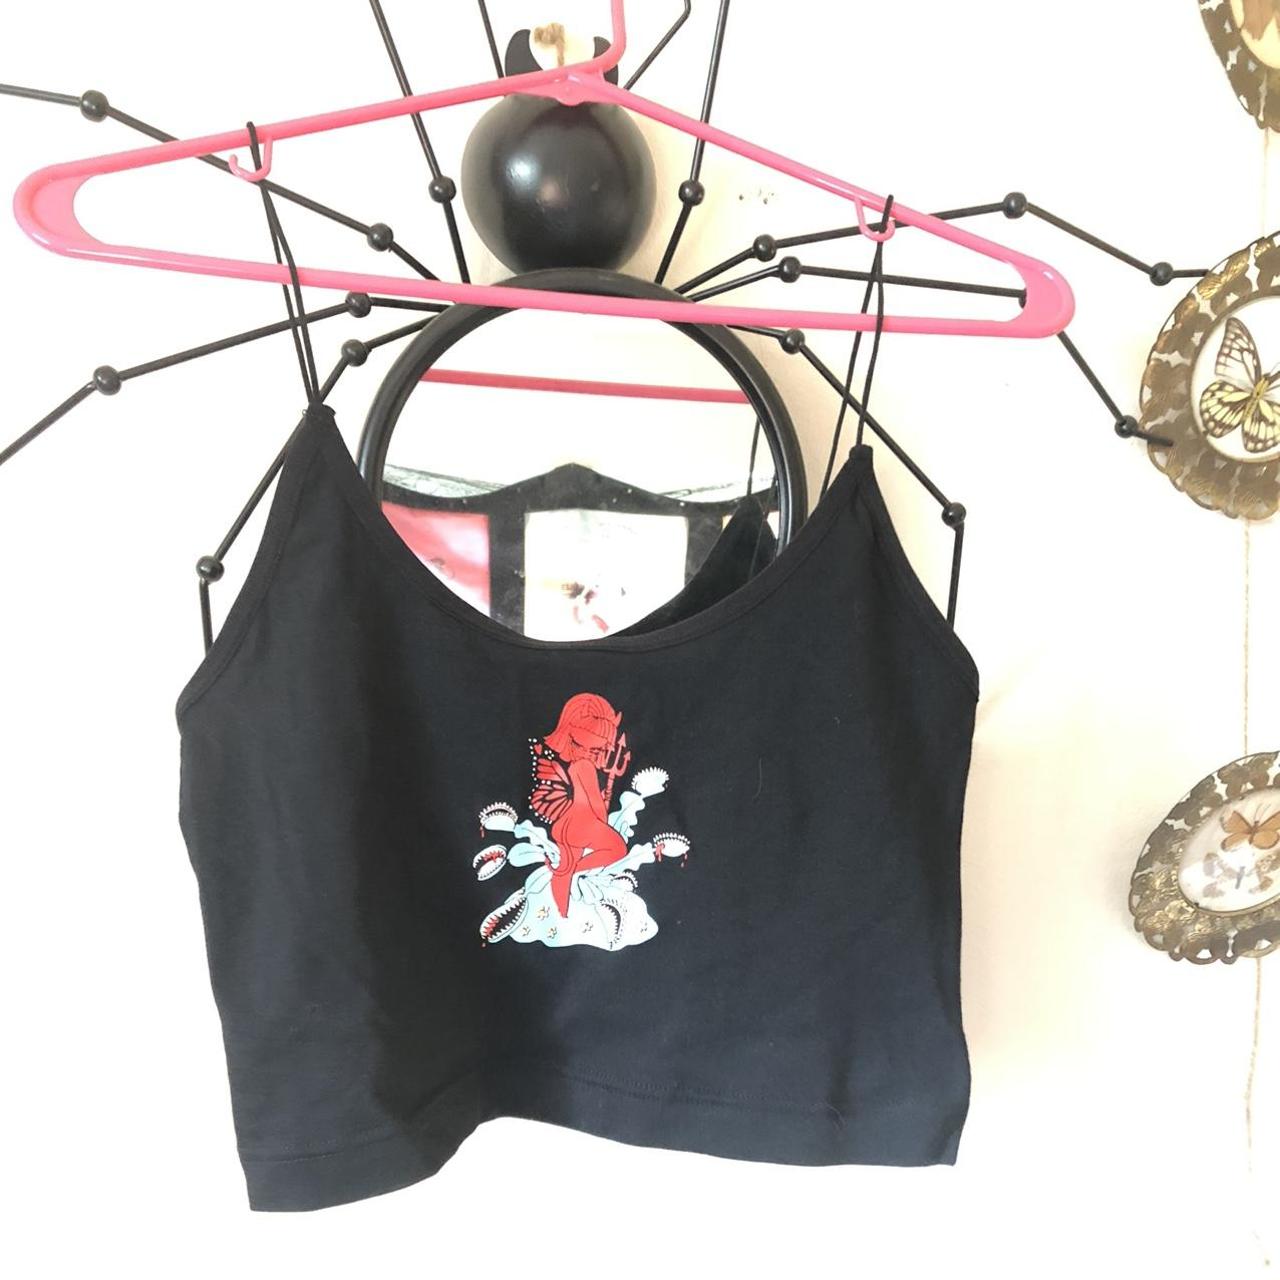 Product Image 1 - Valfre crop top

NWOT, I don’t